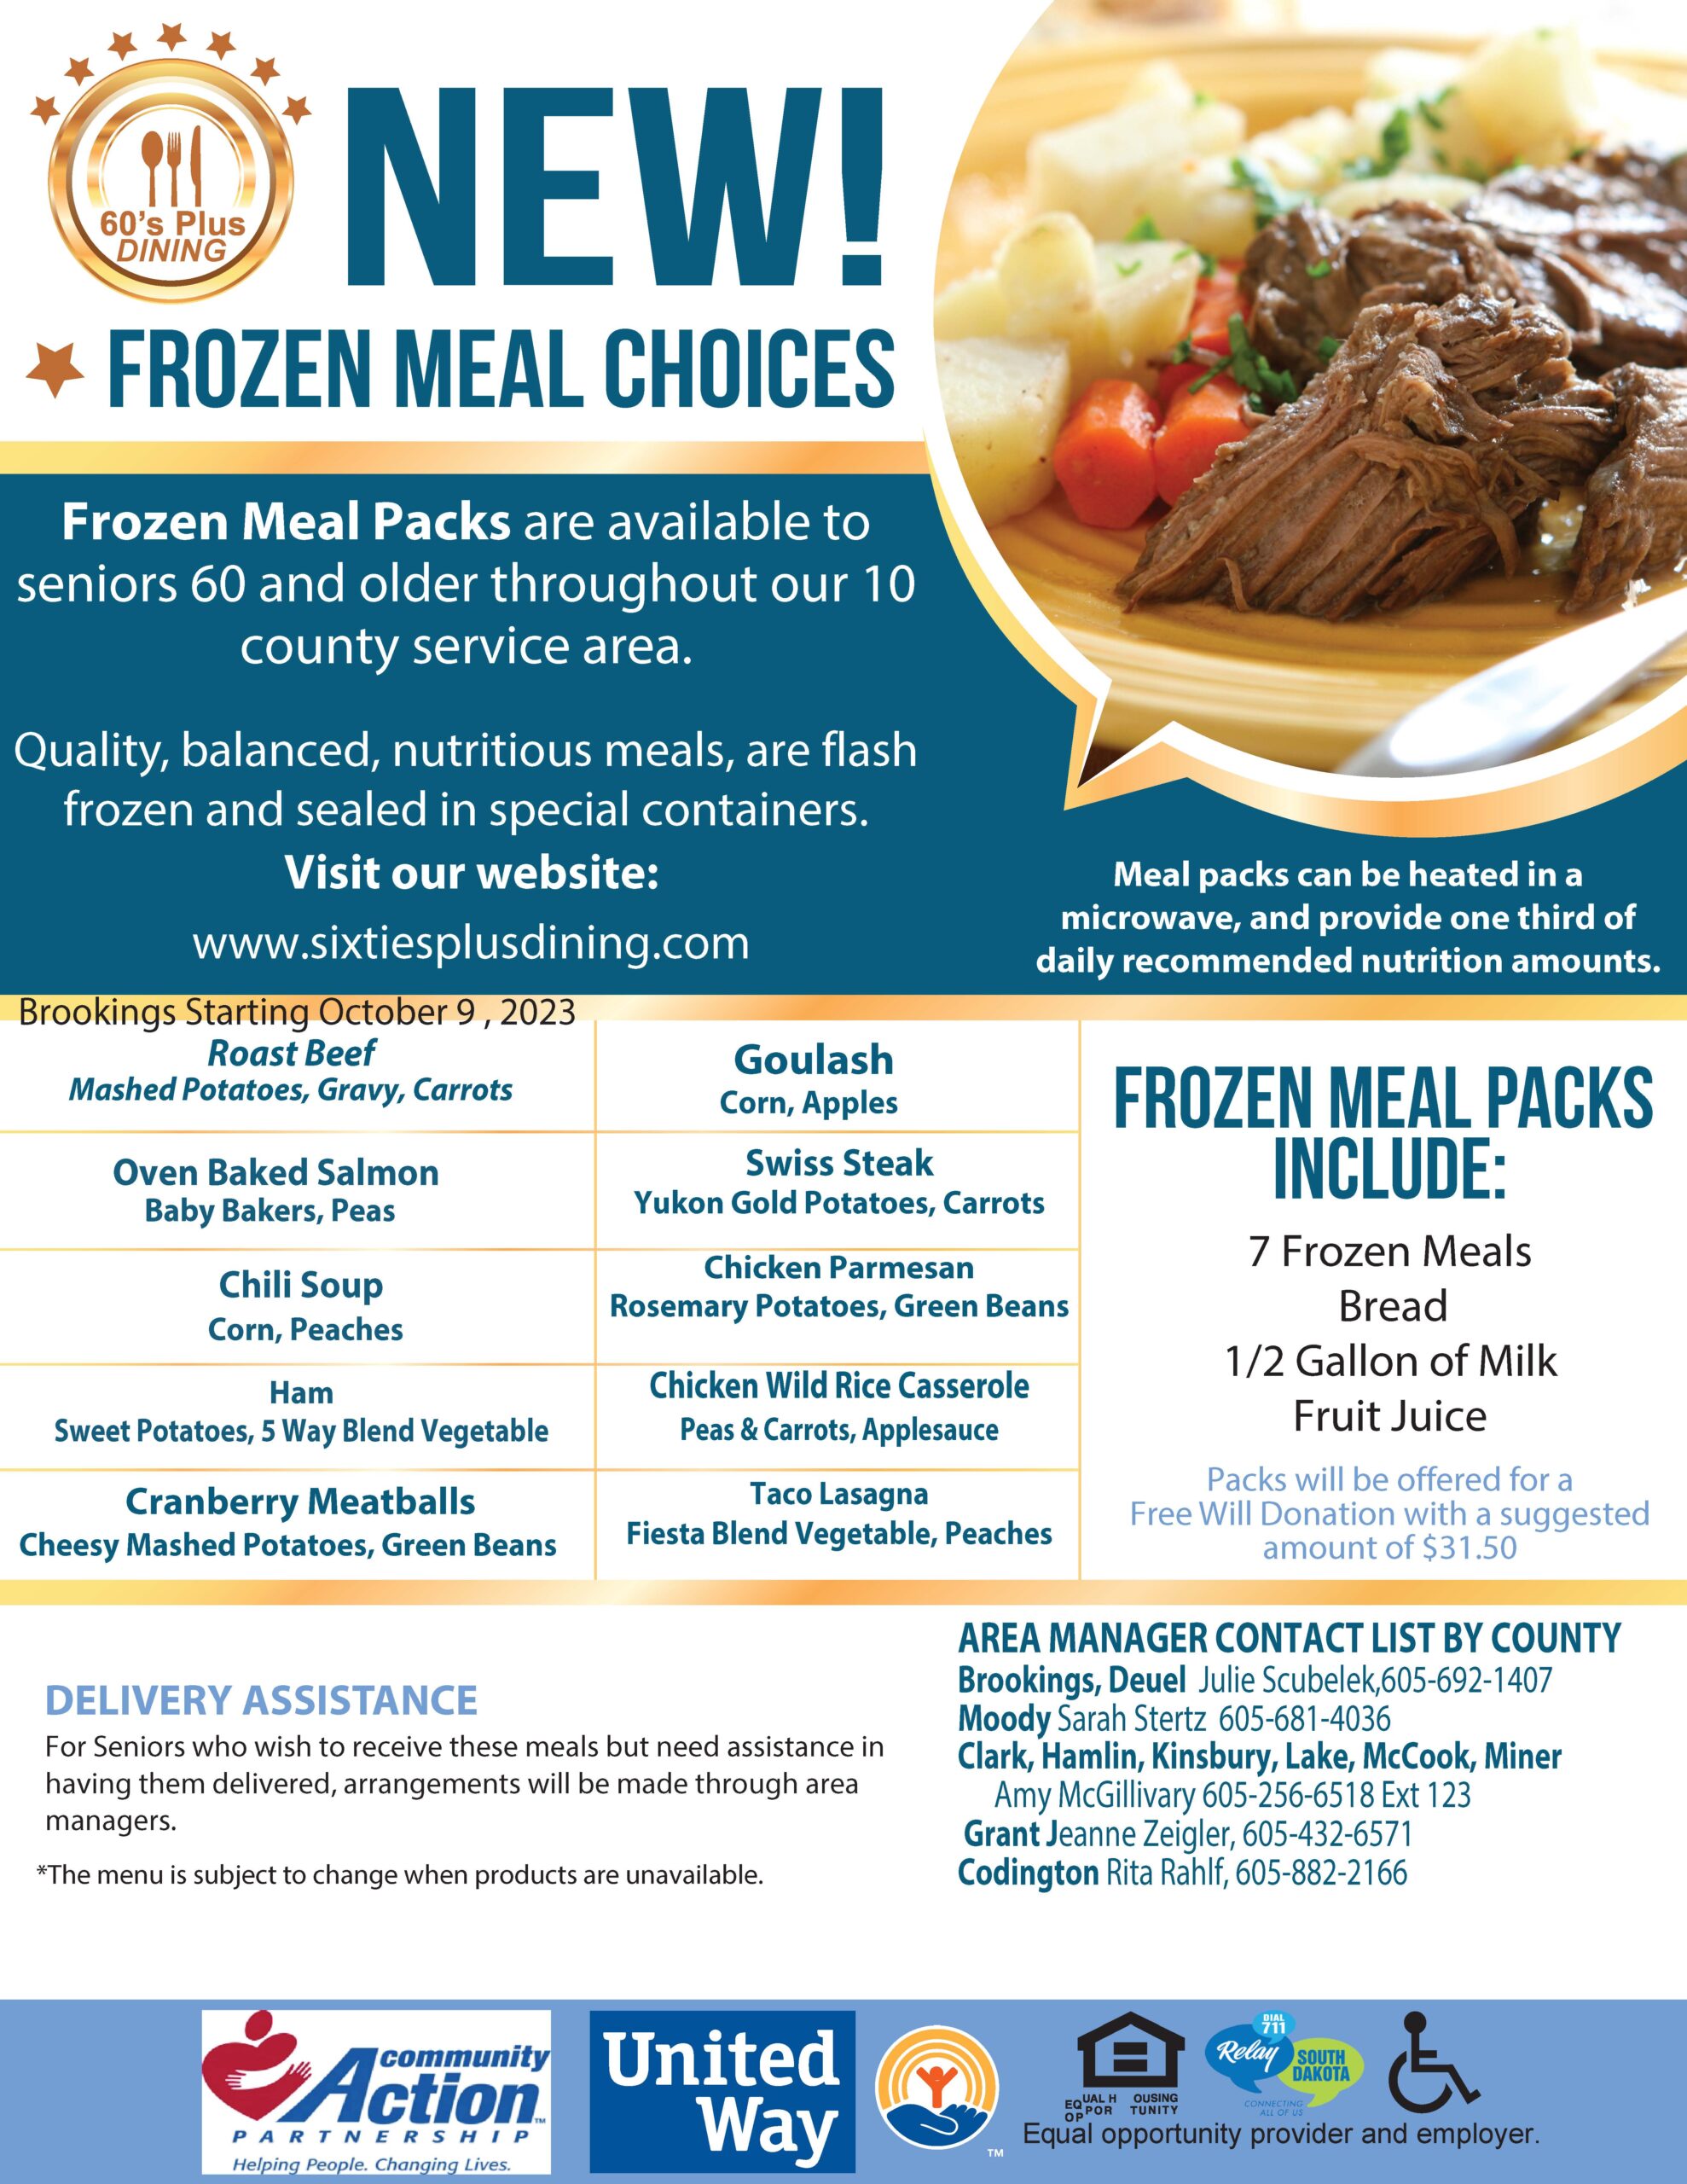 Brookings Frozen Meal Choices - October 2023